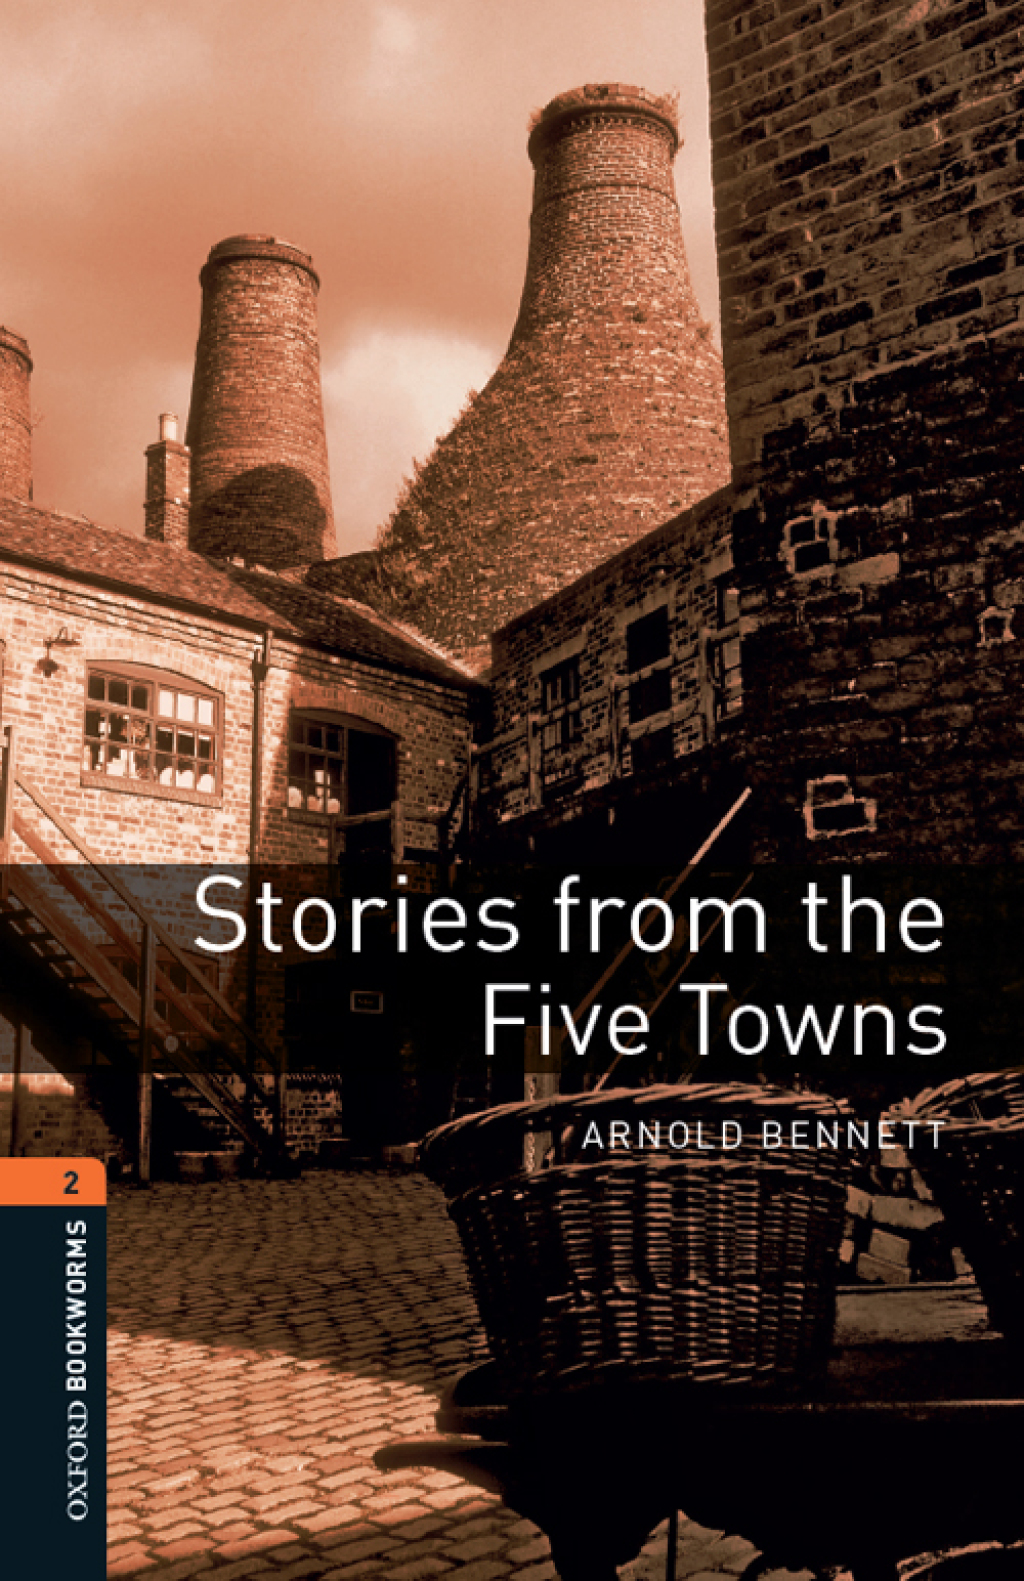 Stories from the Five Towns Level 2 Oxford Bookworms Library - 3rd Edition (eBook Rental)